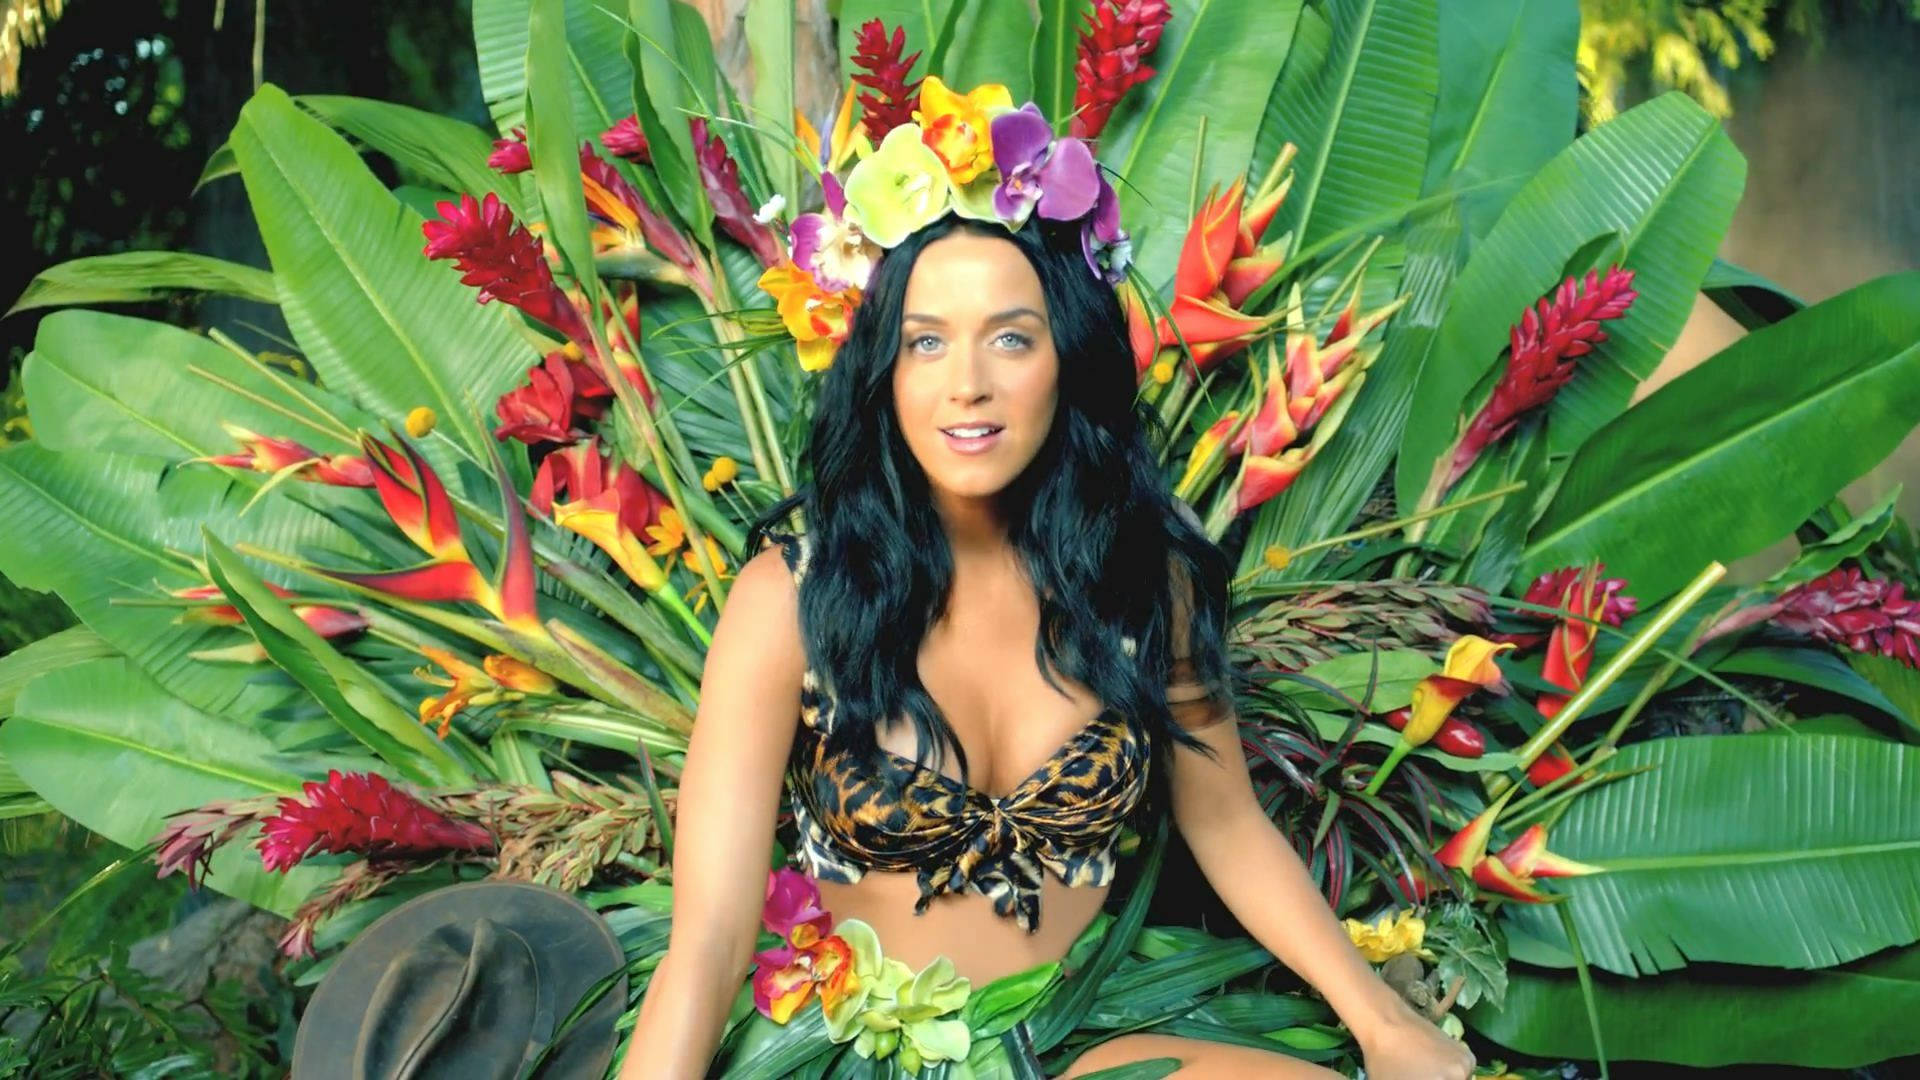 Katy Perry in the Music Video for 